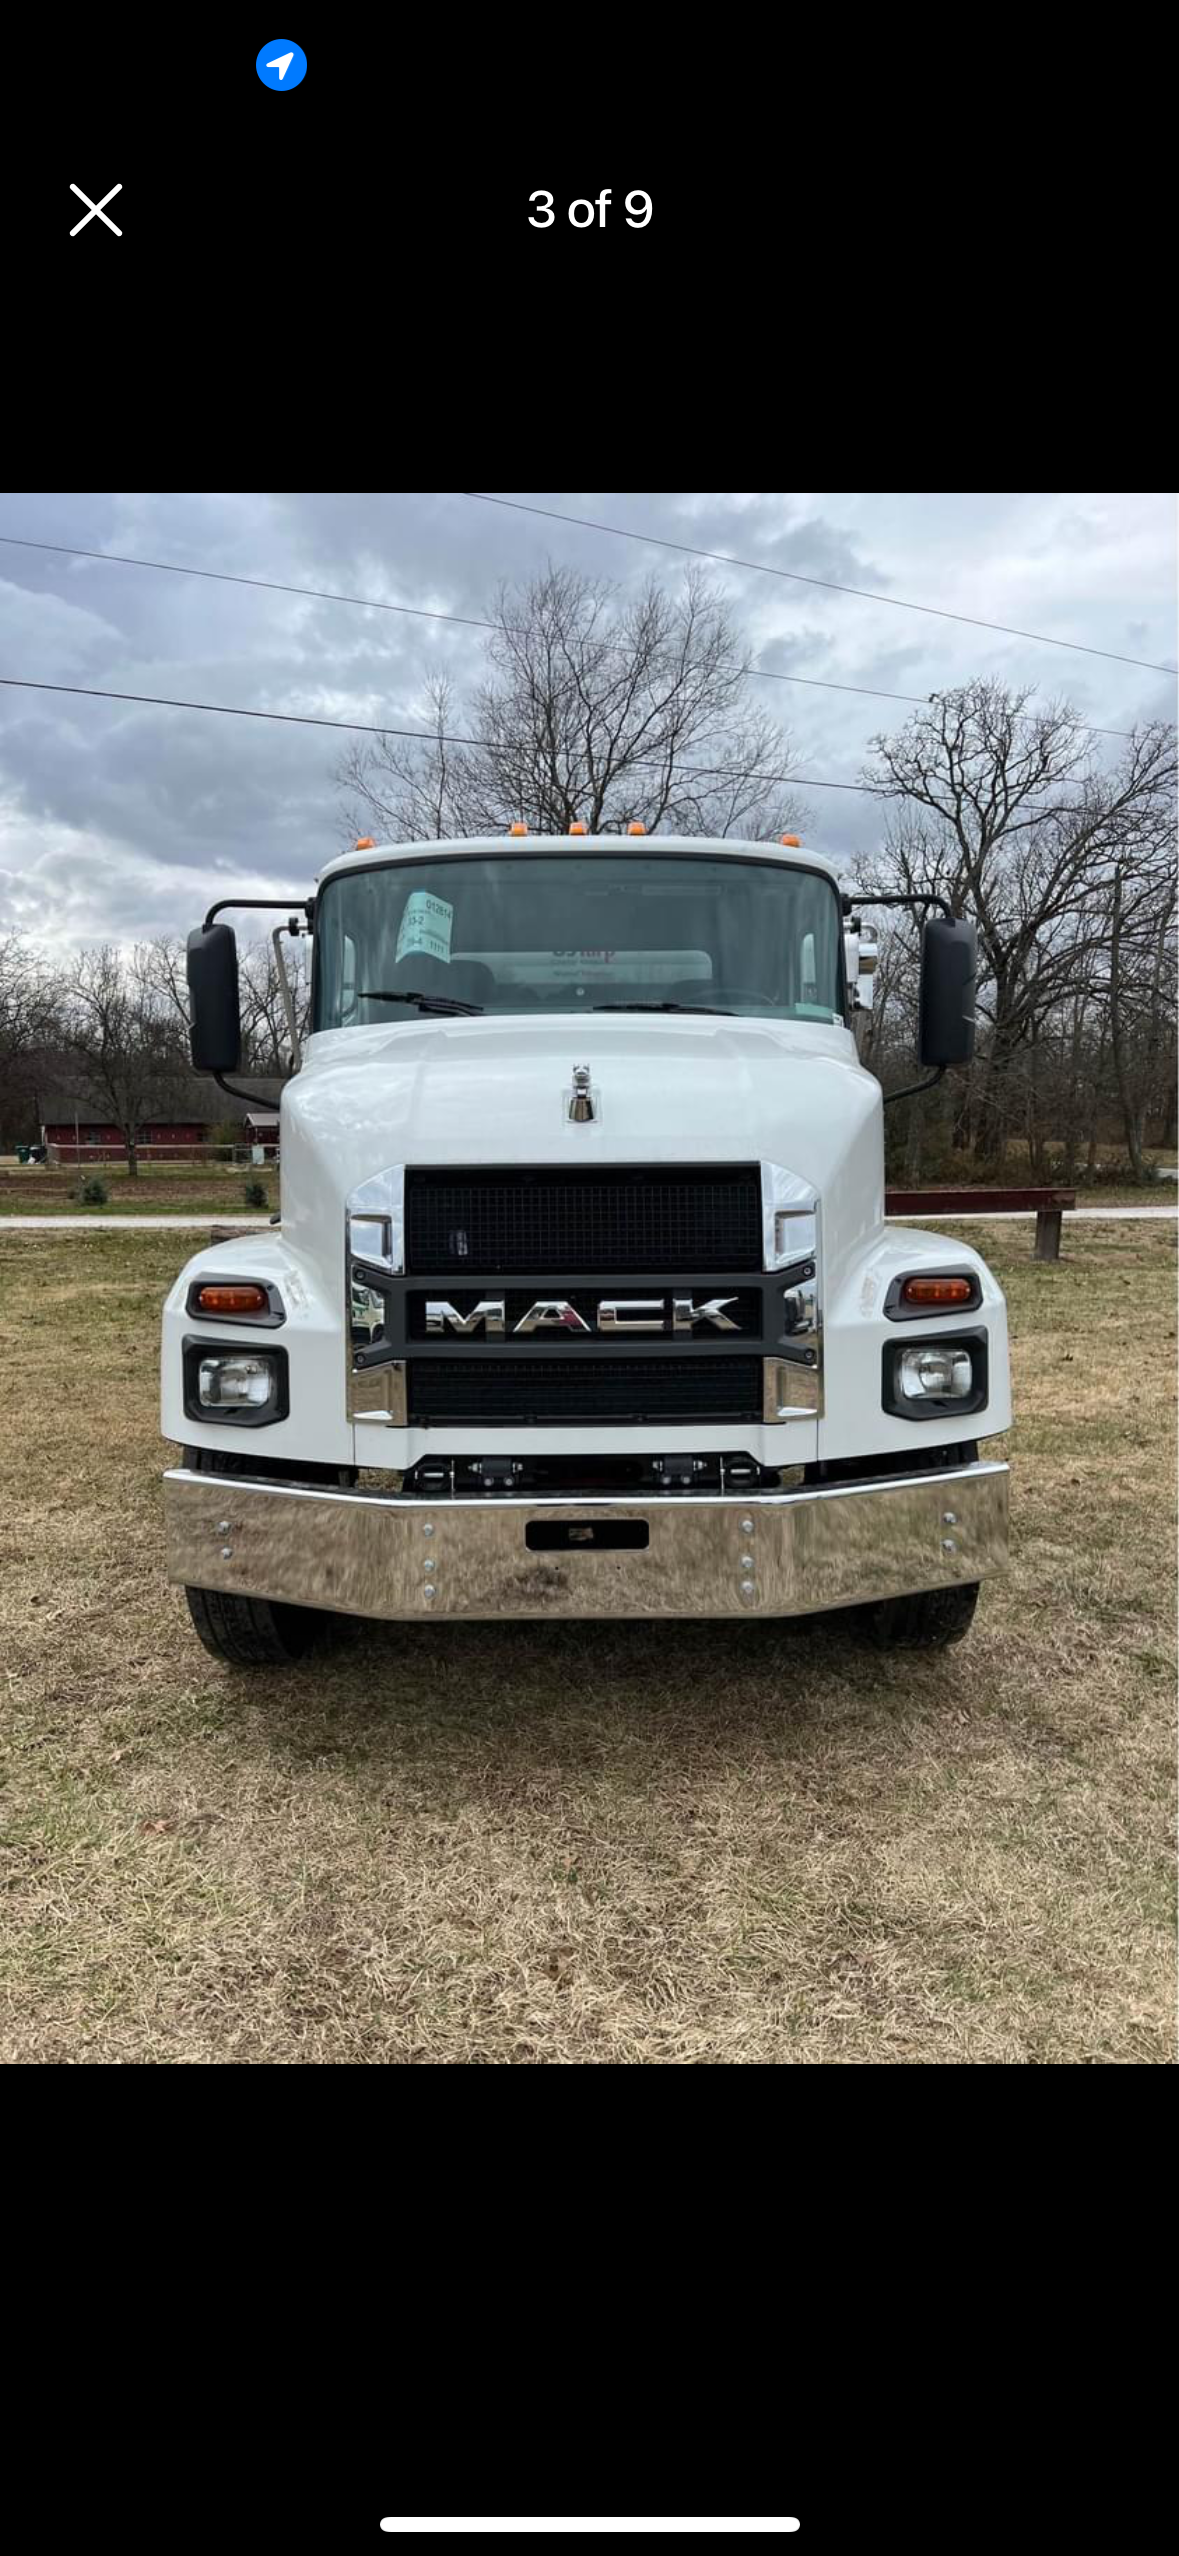 A white mack truck is parked in a grassy field.